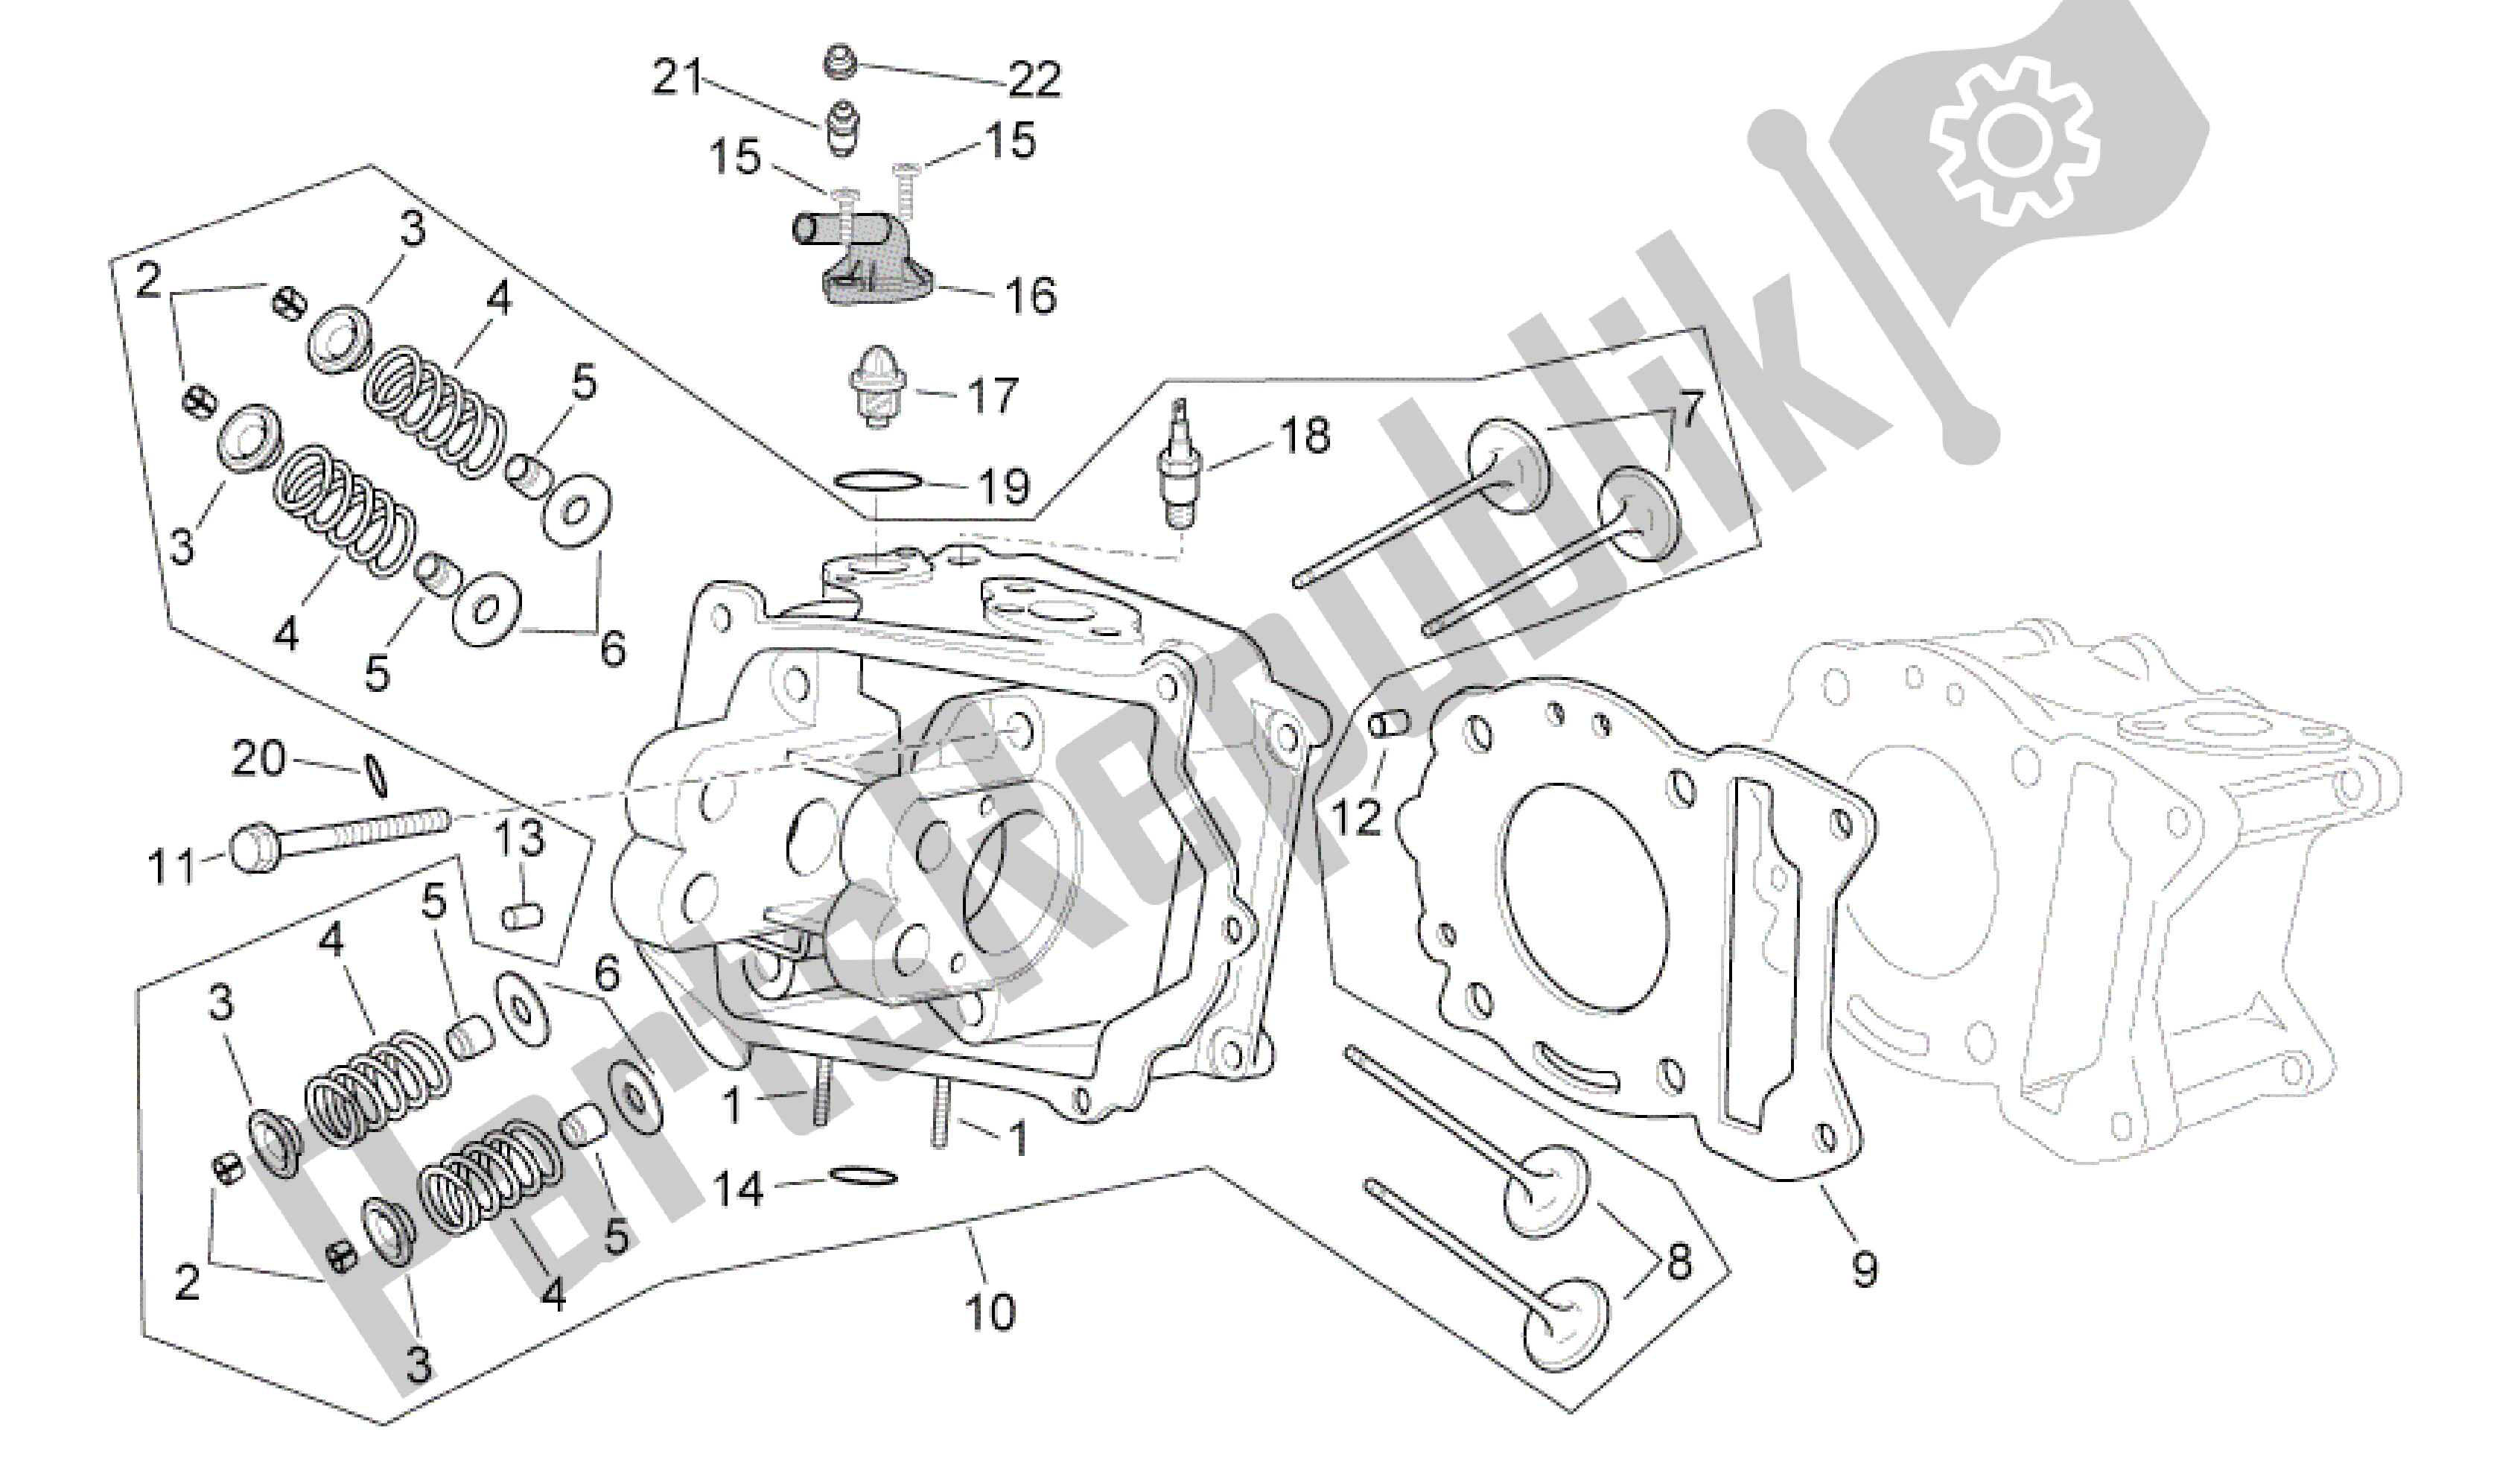 All parts for the Cylinder Head of the Aprilia Sport City 300 2008 - 2010